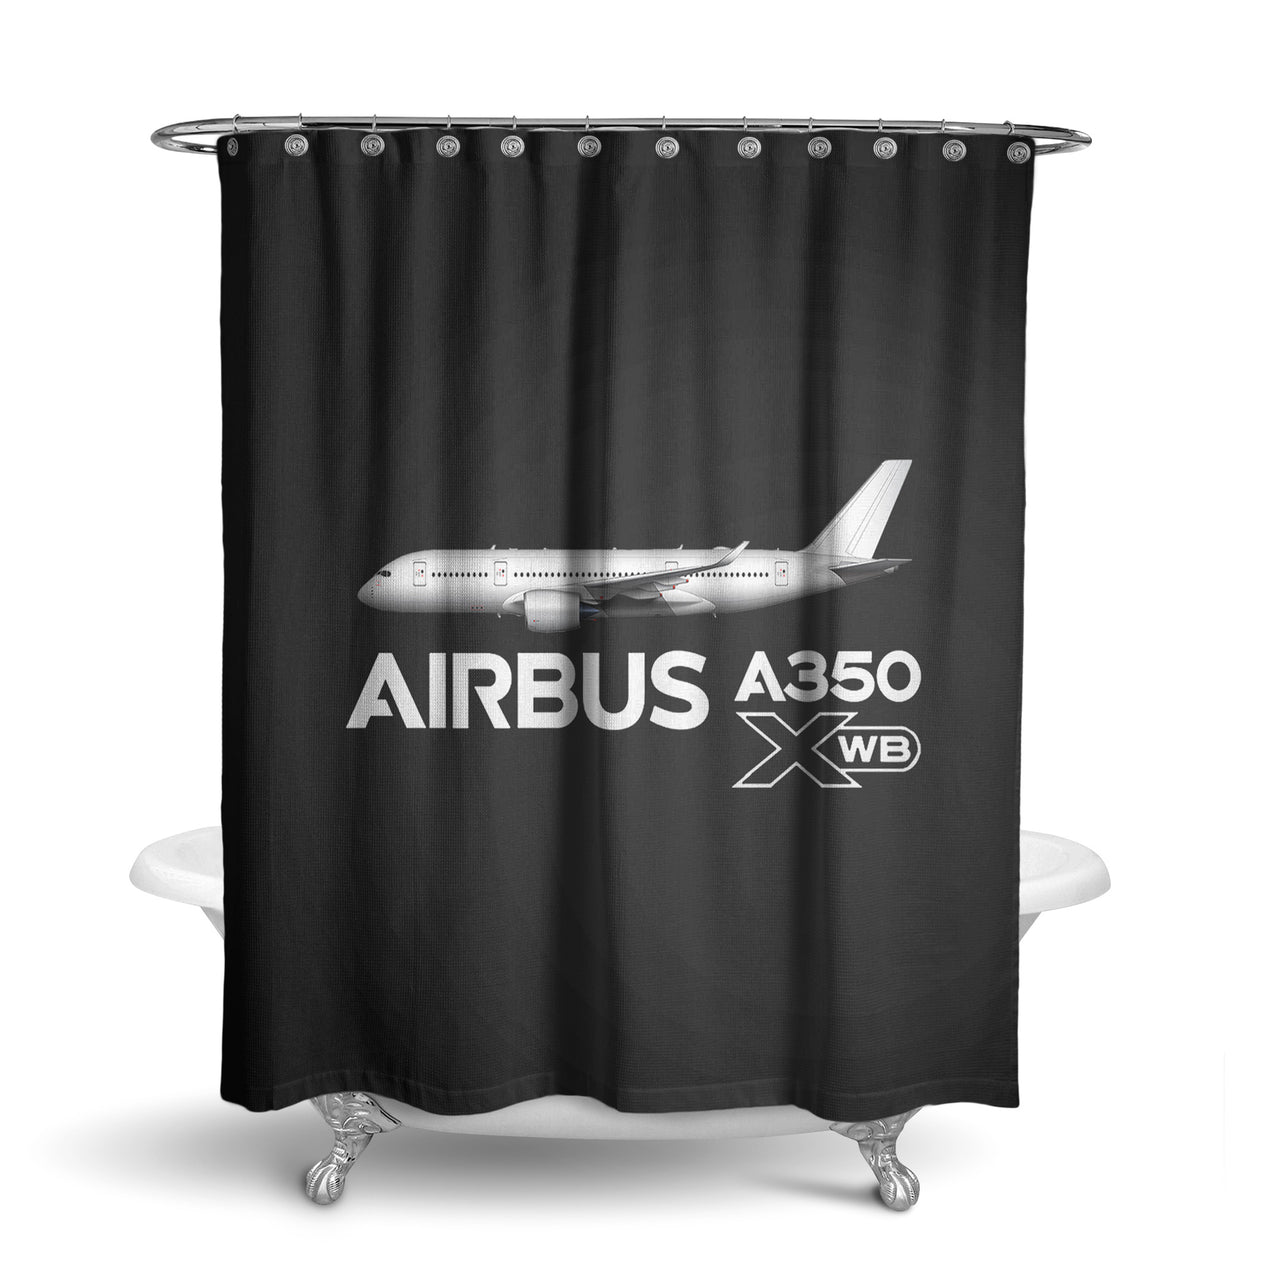 The Airbus A350 WXB Designed Shower Curtains